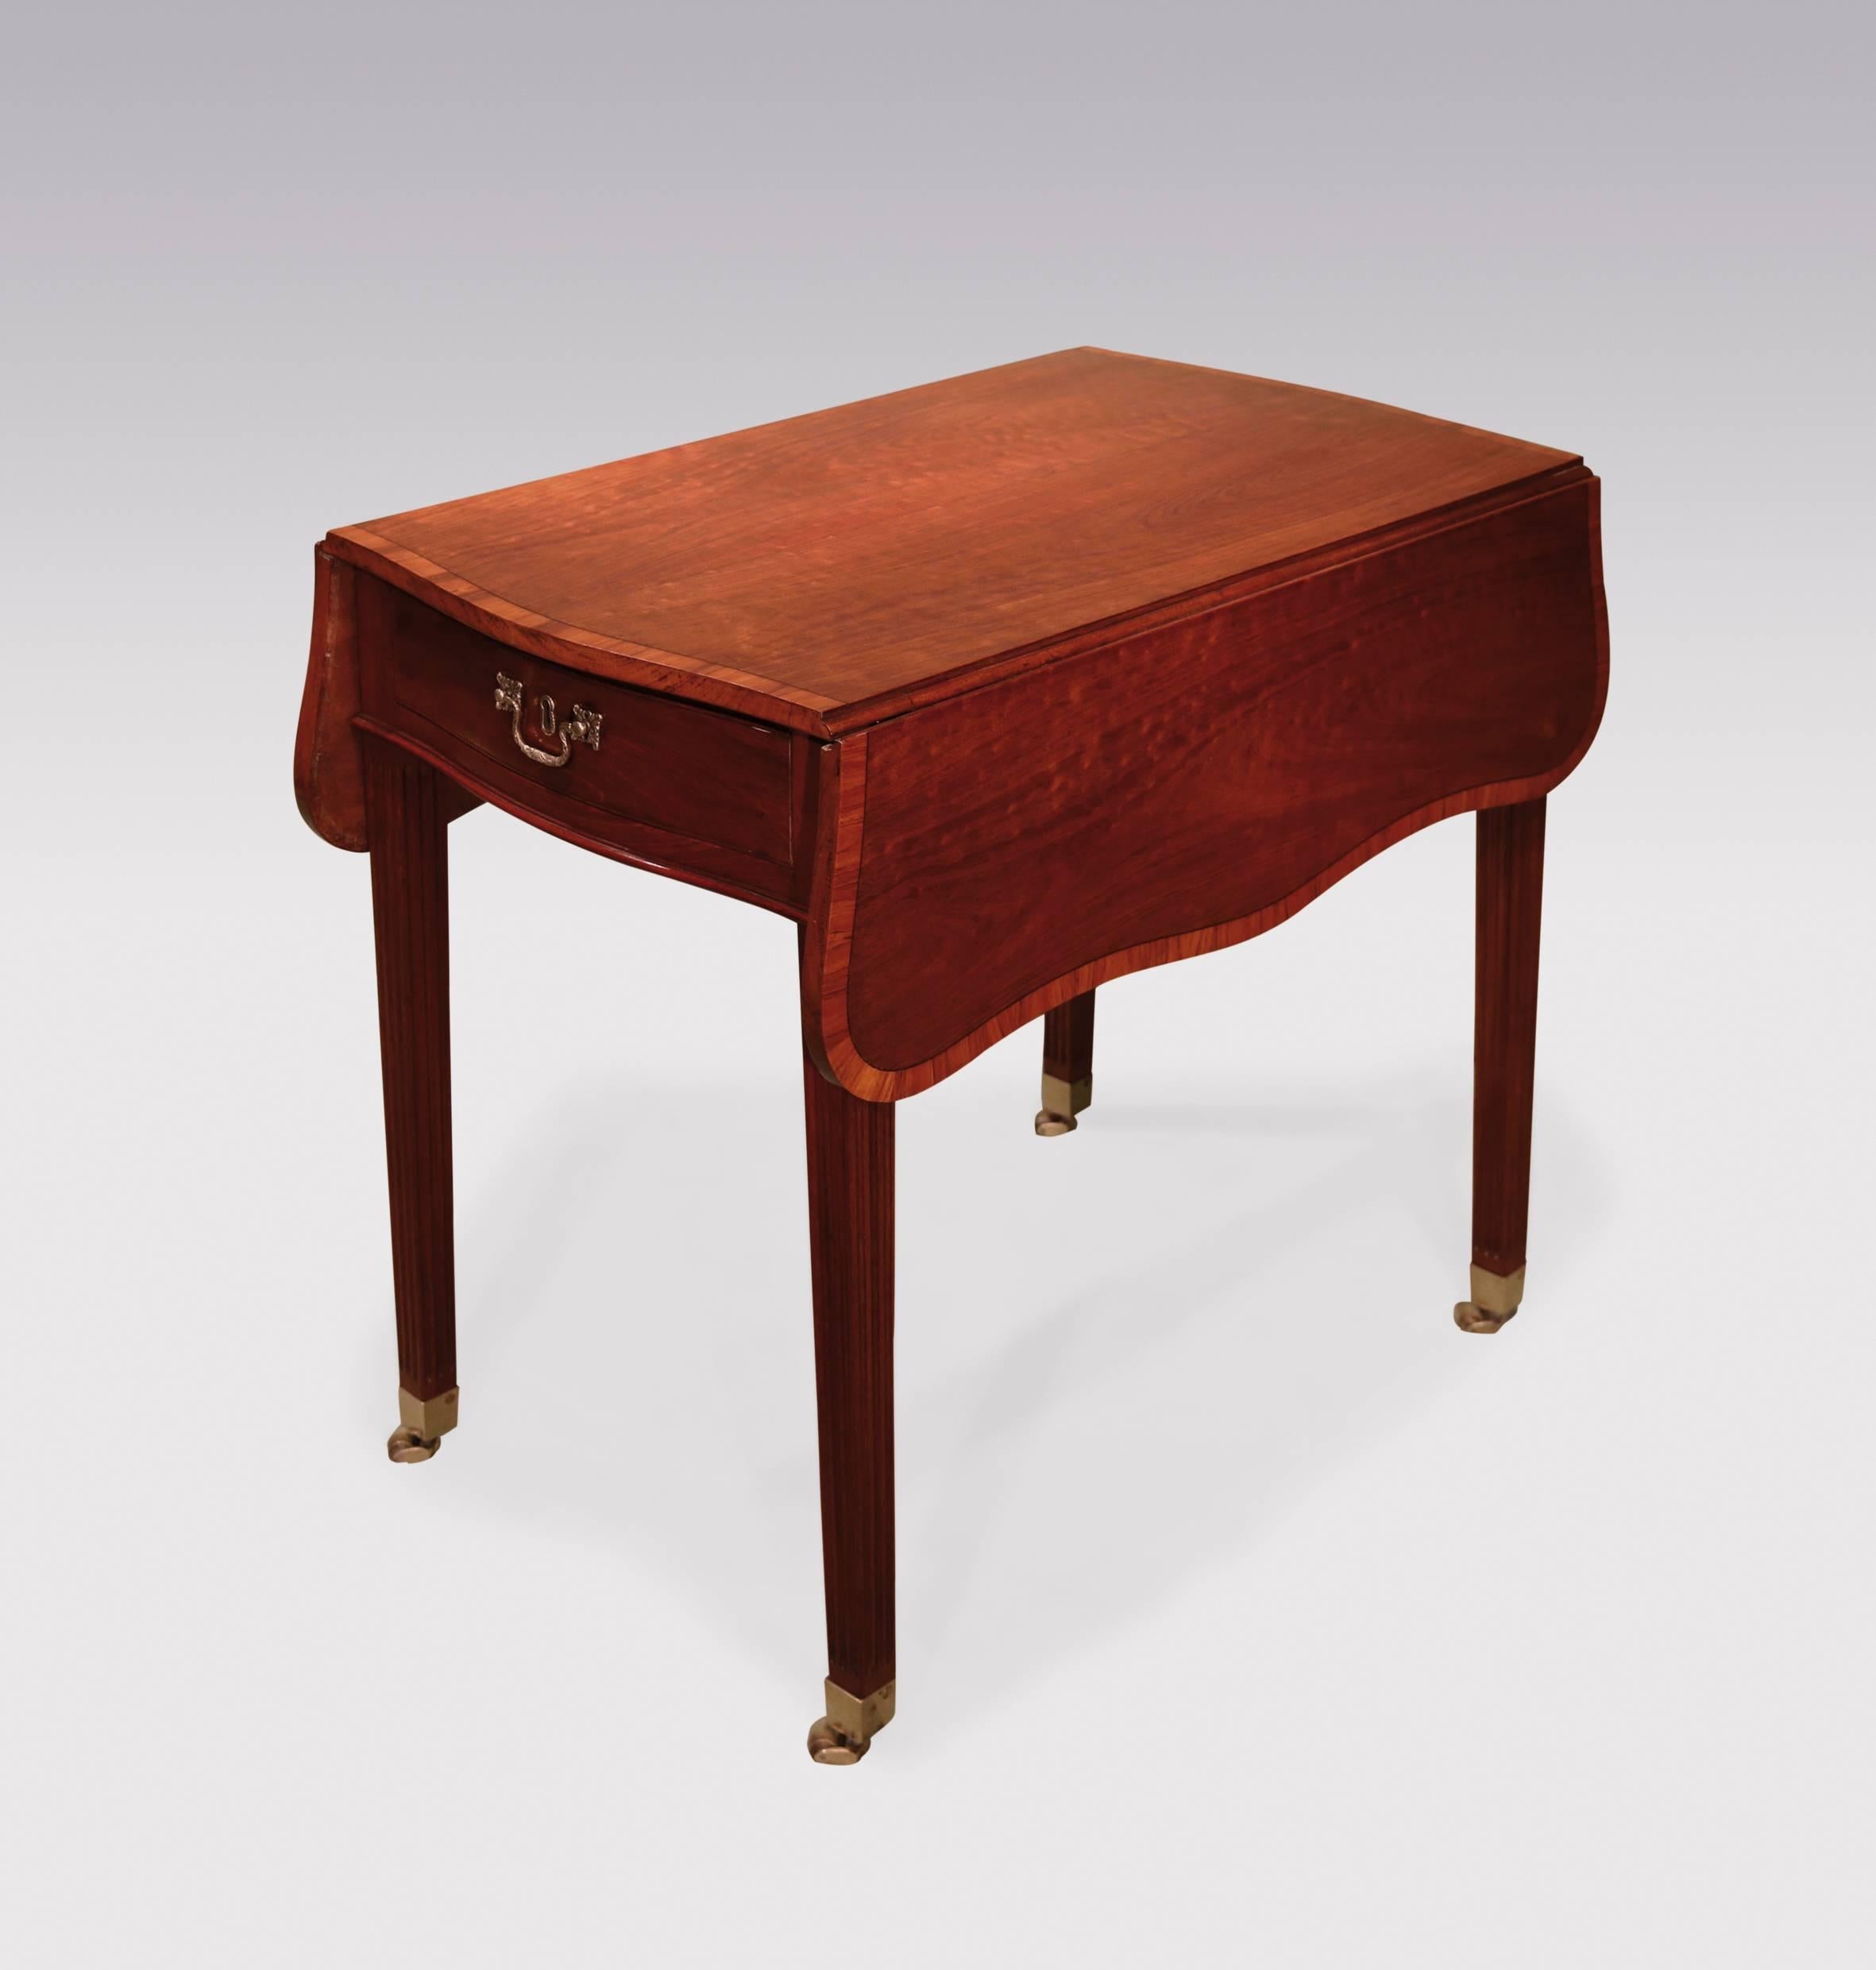 A mid-18th century George III period plum-pudding mahogany Pembroke Table, having padauk wood crossbanded serpentine top, above frieze drawer, supported on fluted square legs, ending on original brass castors. Flaps down: 20ins (51cms)